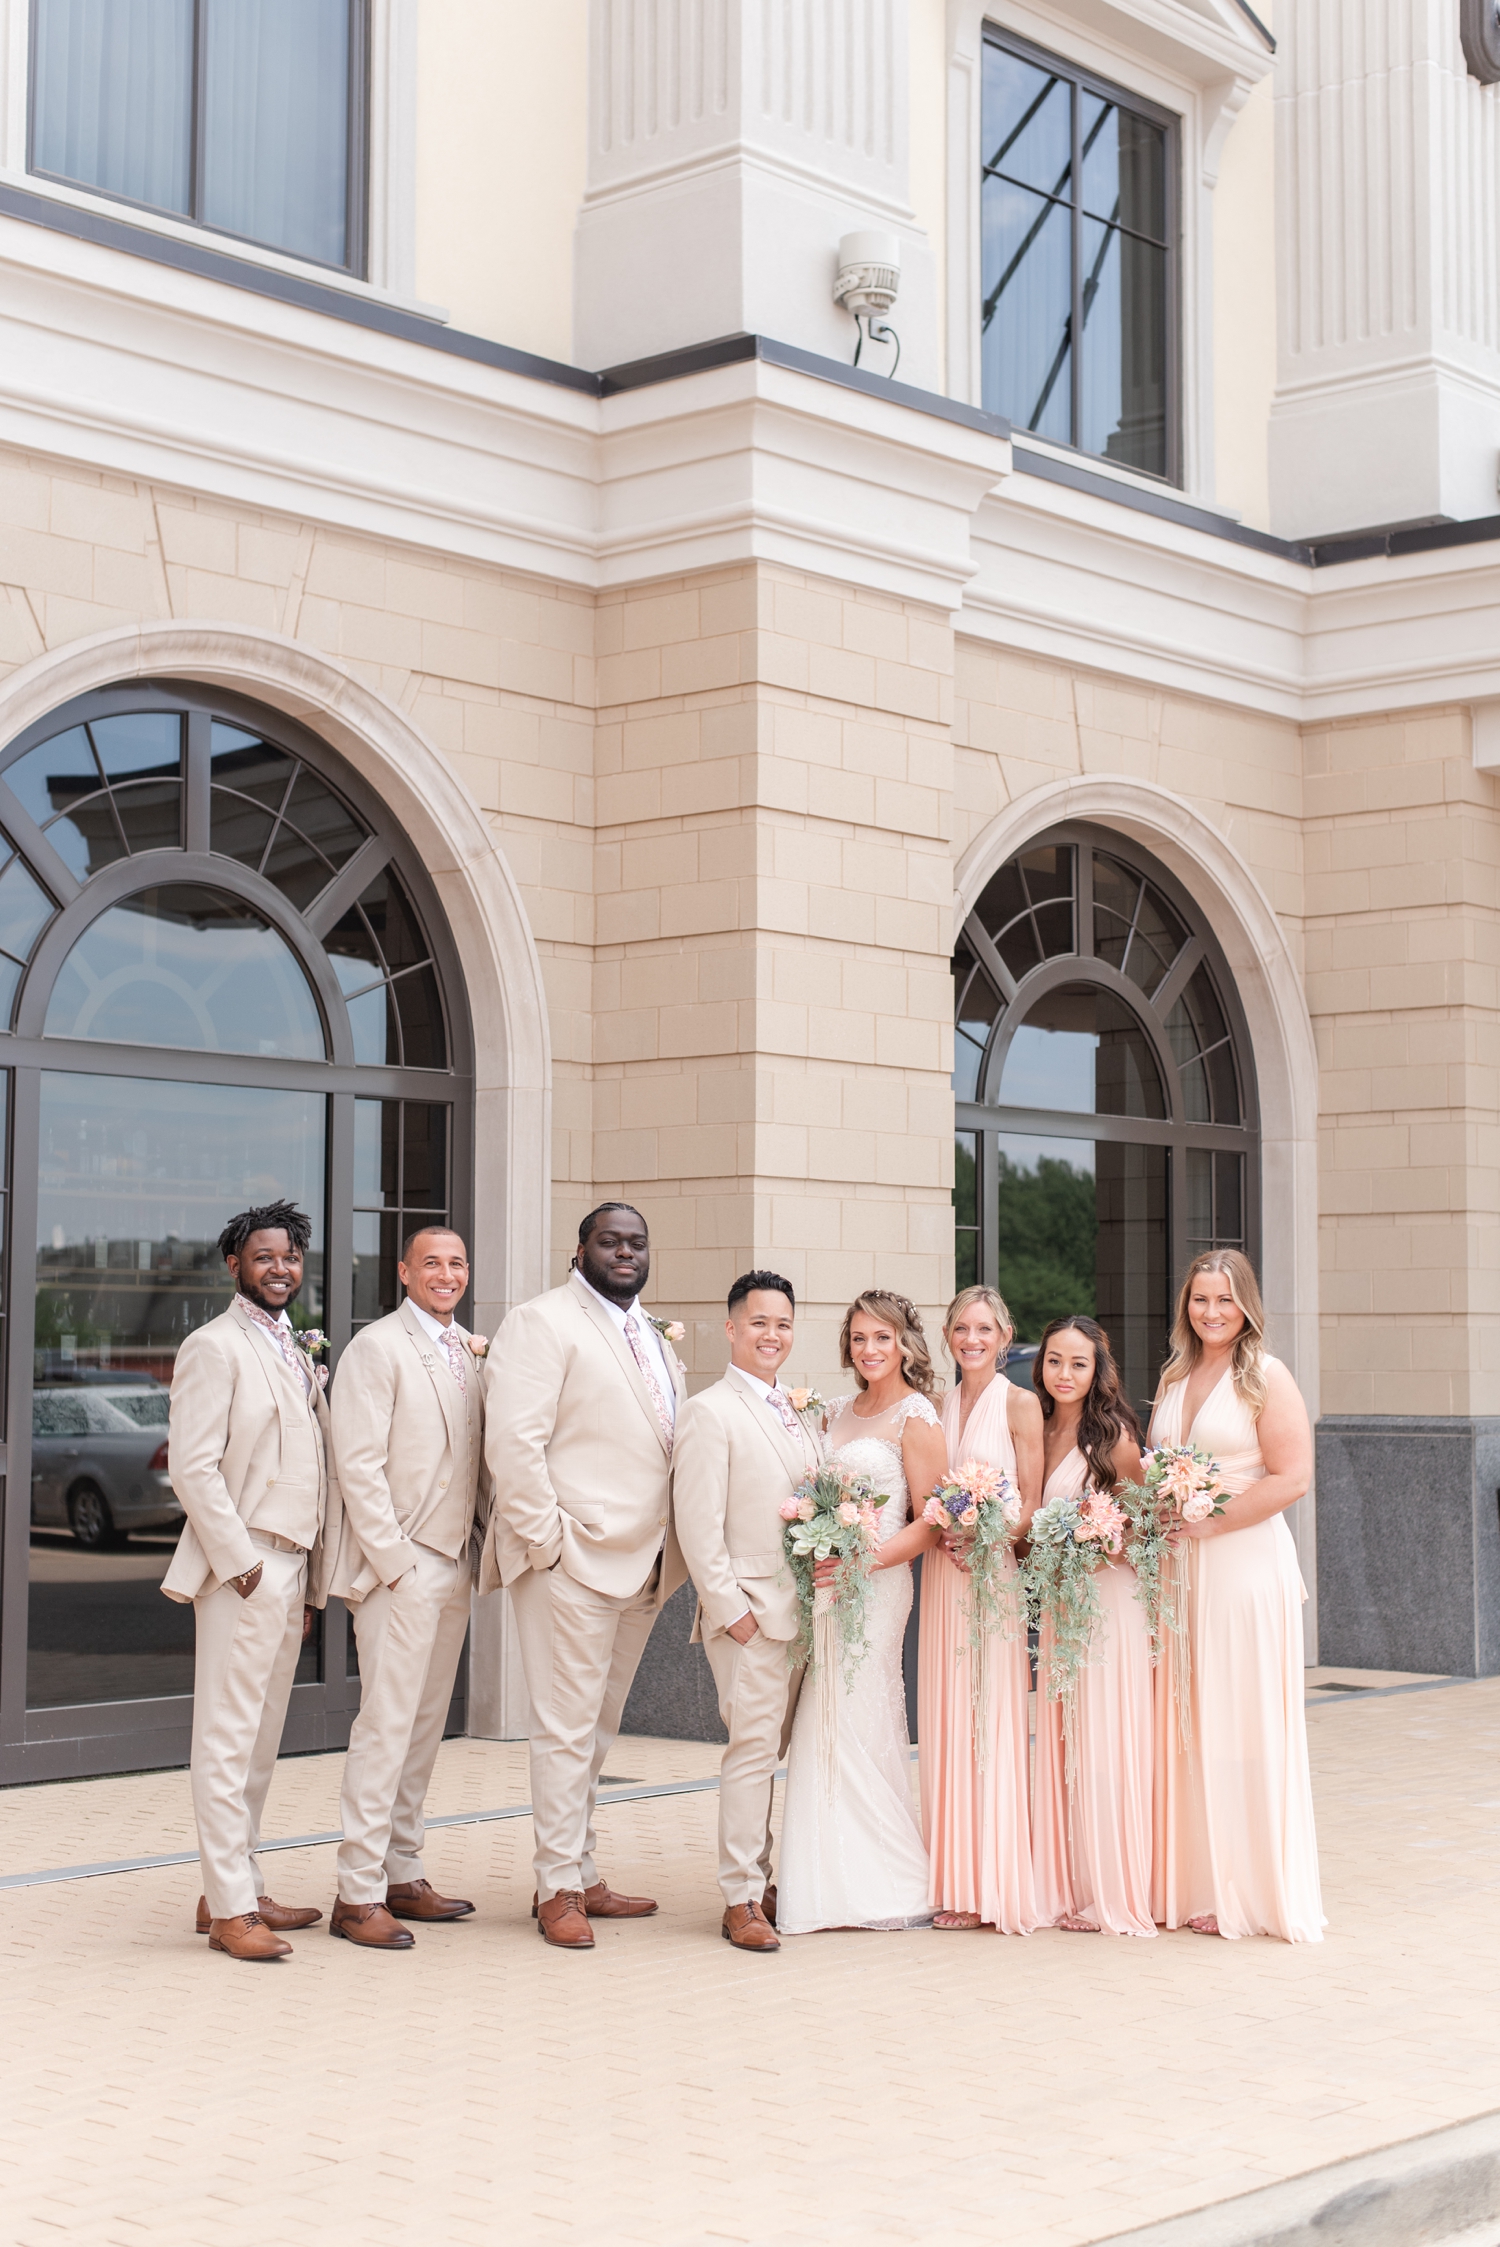 Boho Wedding with Peach and Khaki, Succlents and Pampas Grass at BASH in Carmel Indianapolis Indiana Wedding Photographer